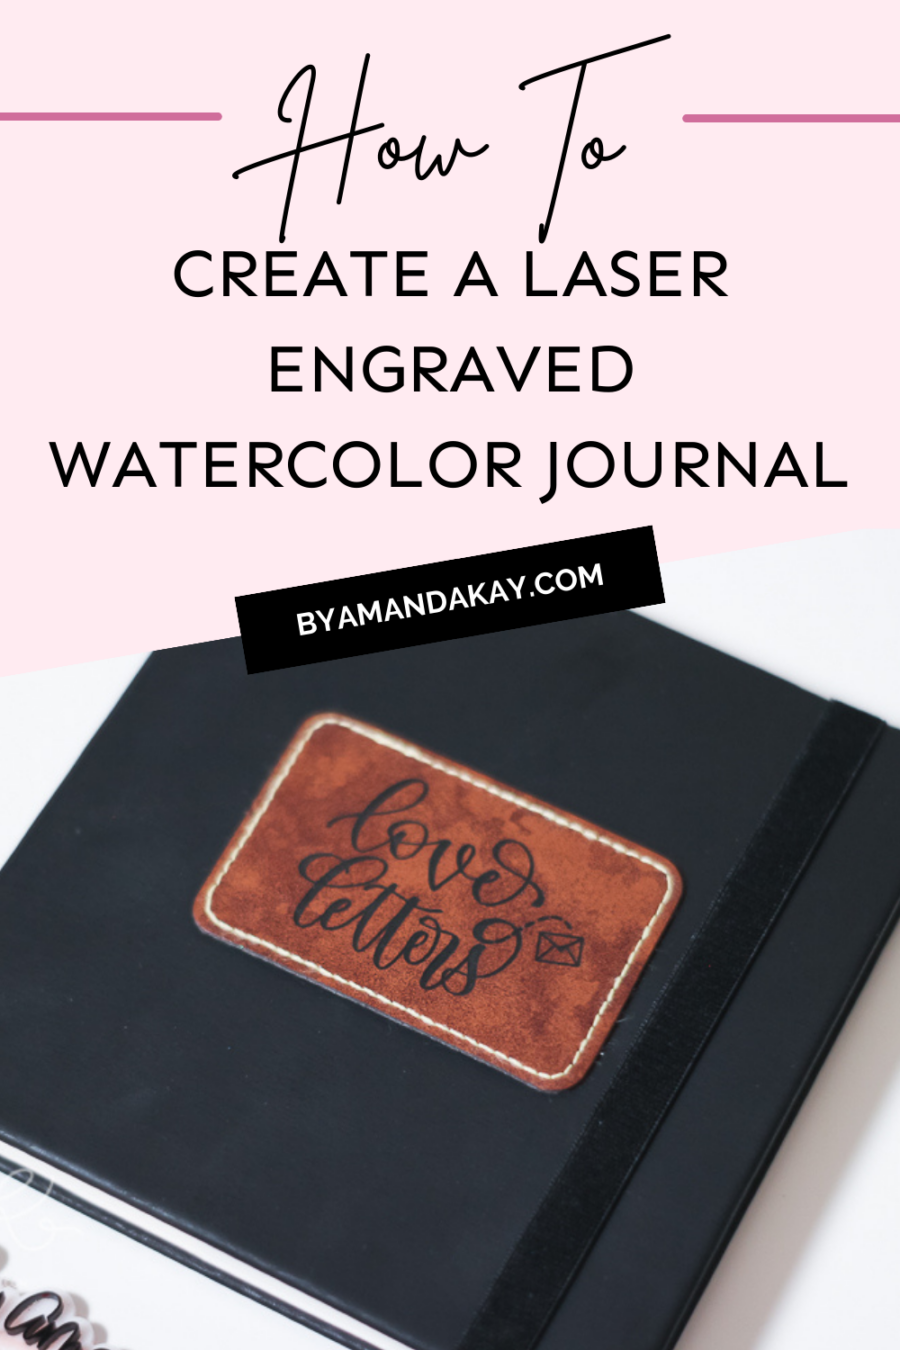 How to create a laser engraved watercolor journal